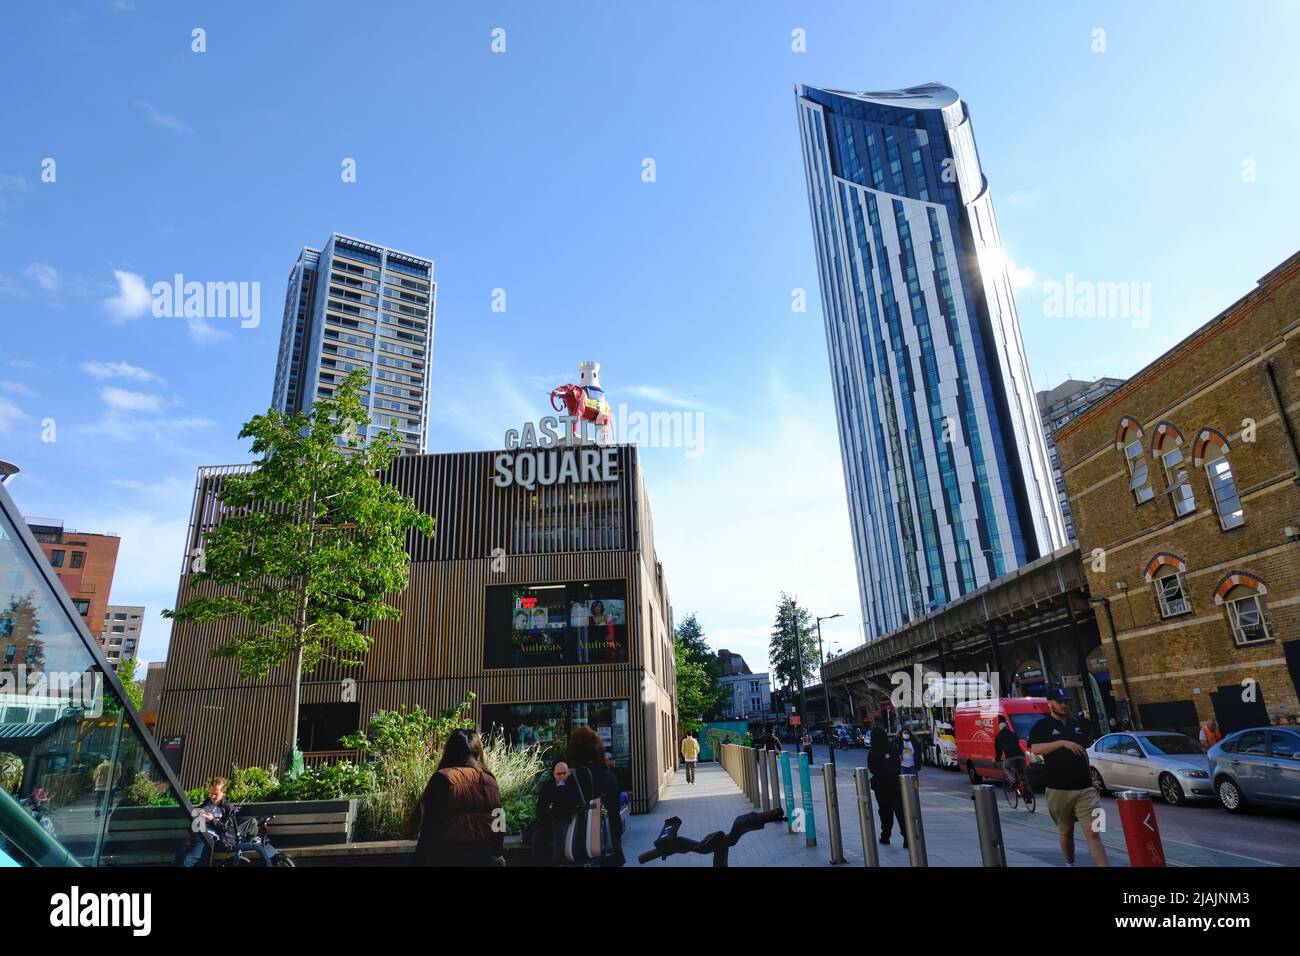 London, UK. A view of Castle Square, a temporary retail space created after the closure of the Elephant and Castle Shopping Centre. Stock Photo